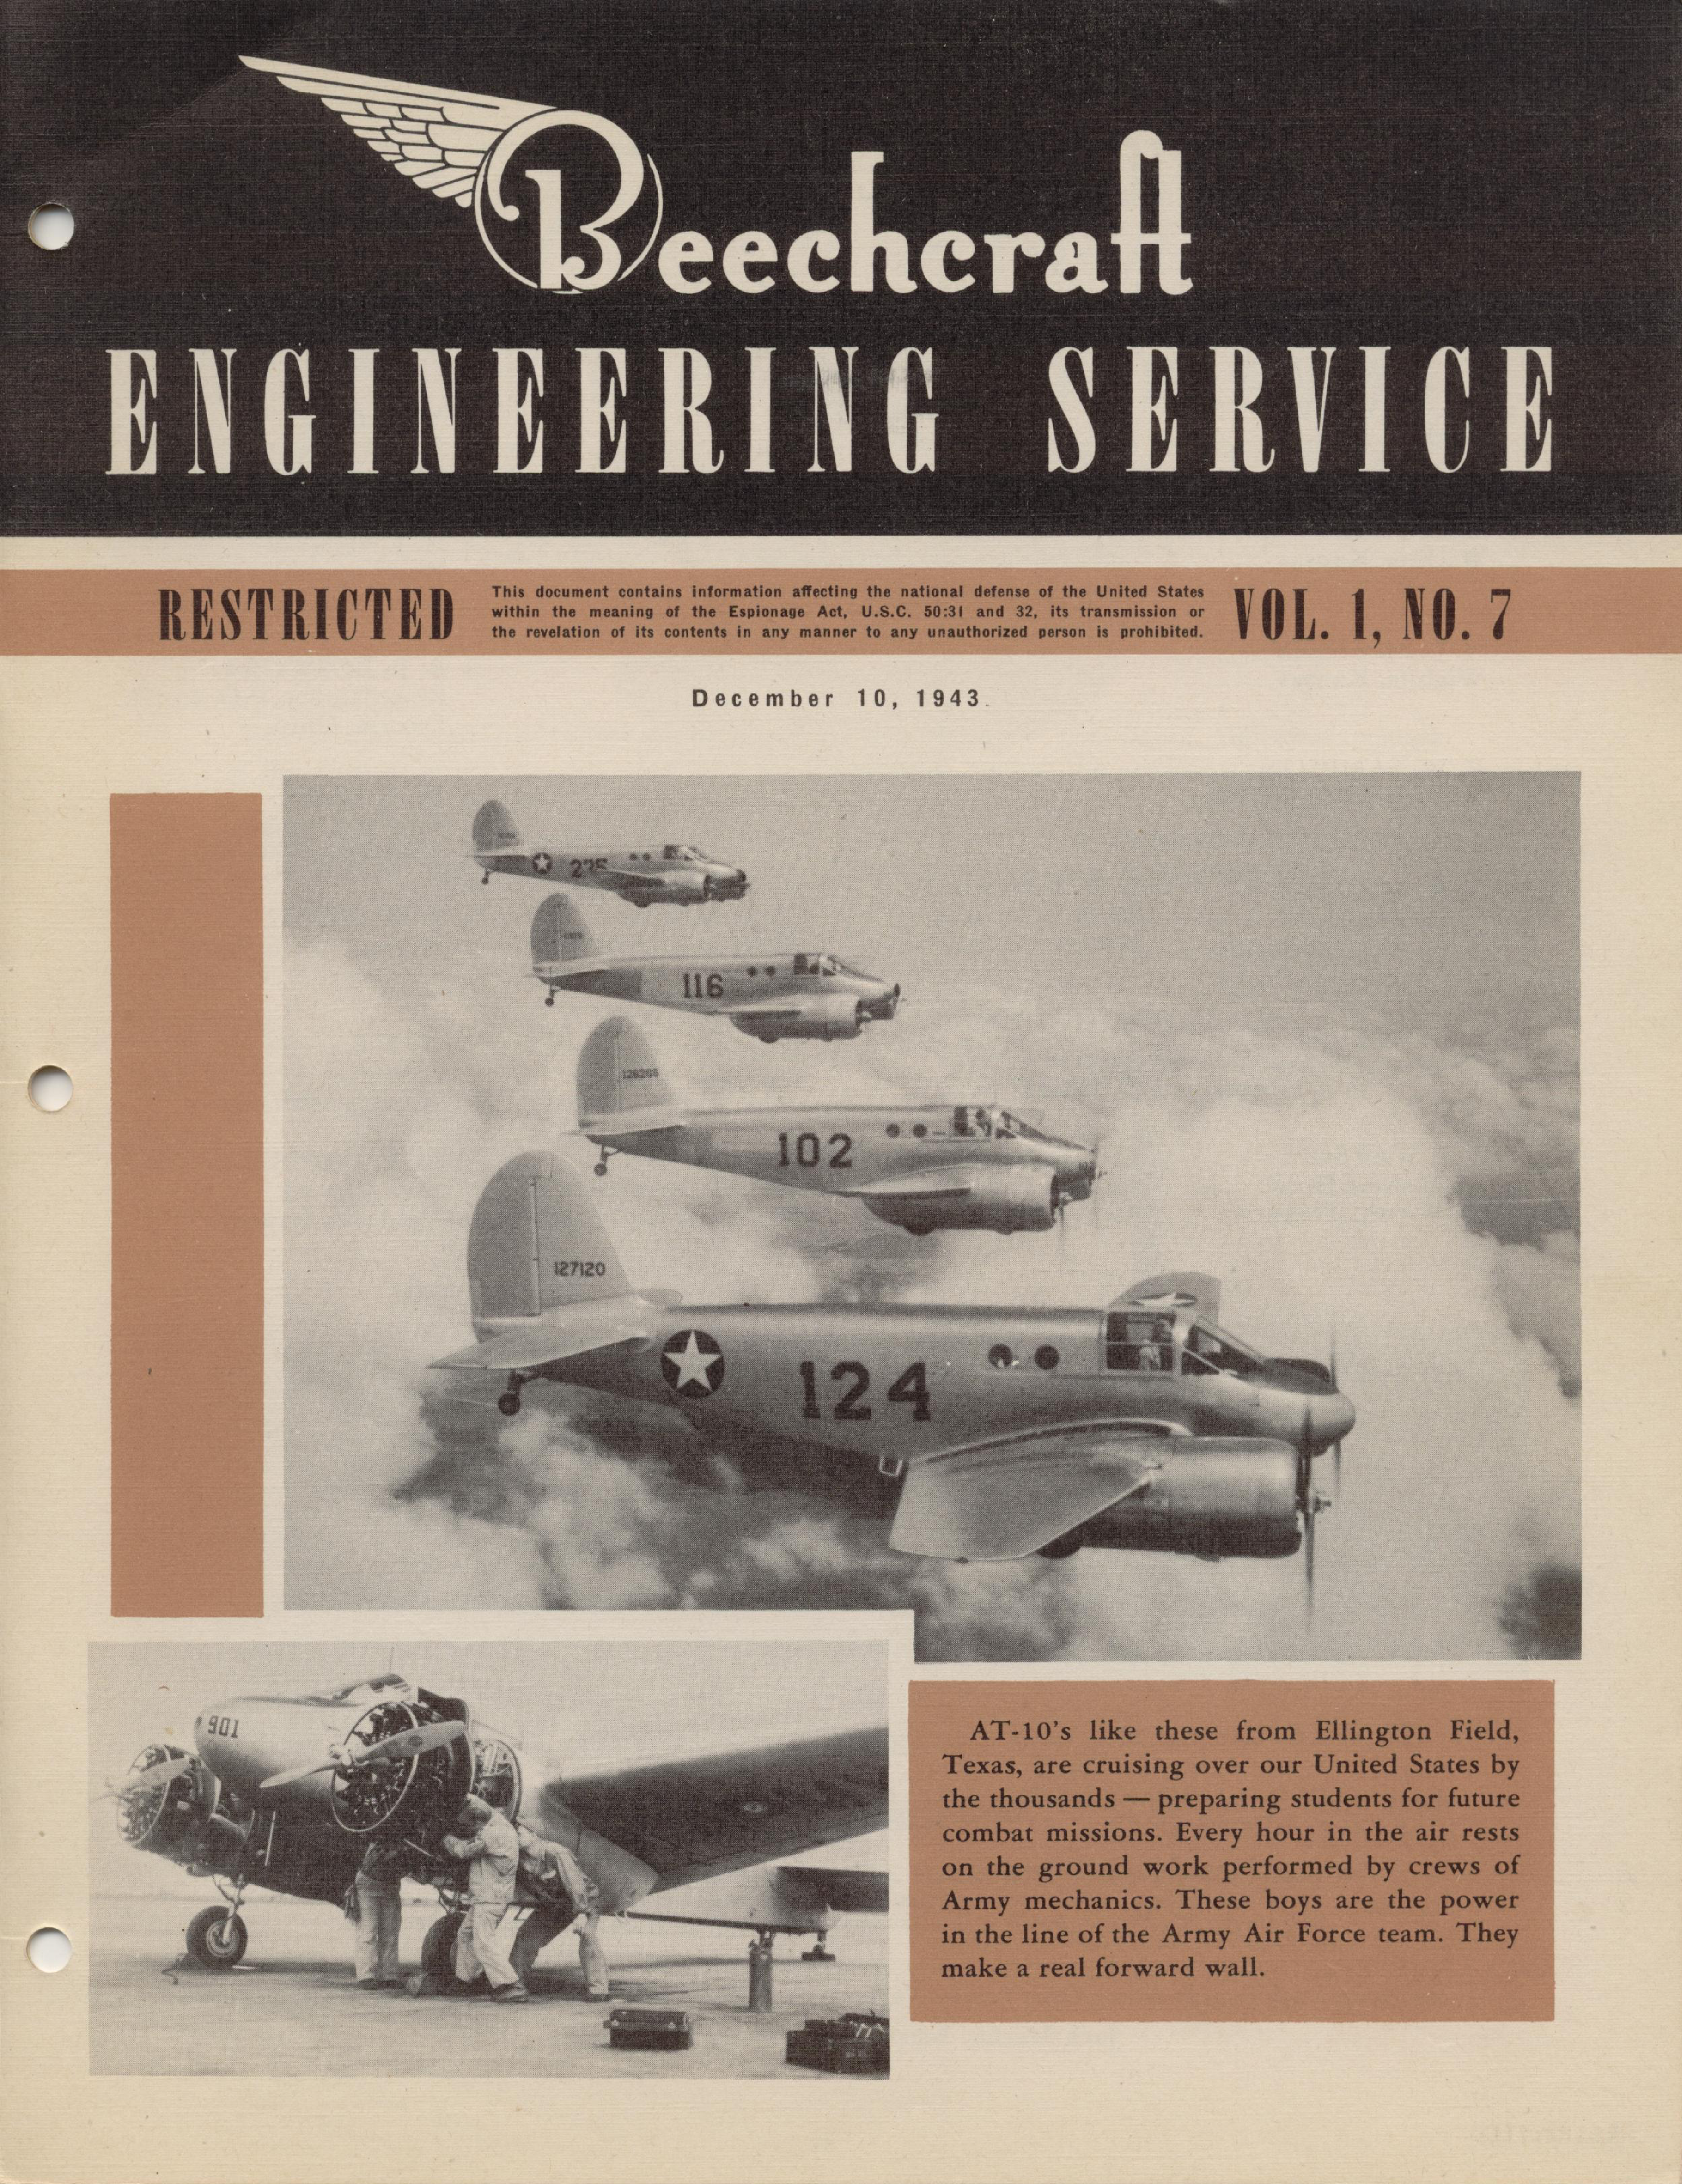 Sample page 1 from AirCorps Library document: Vol. I, No. 7 - Beechcraft Engineering Service